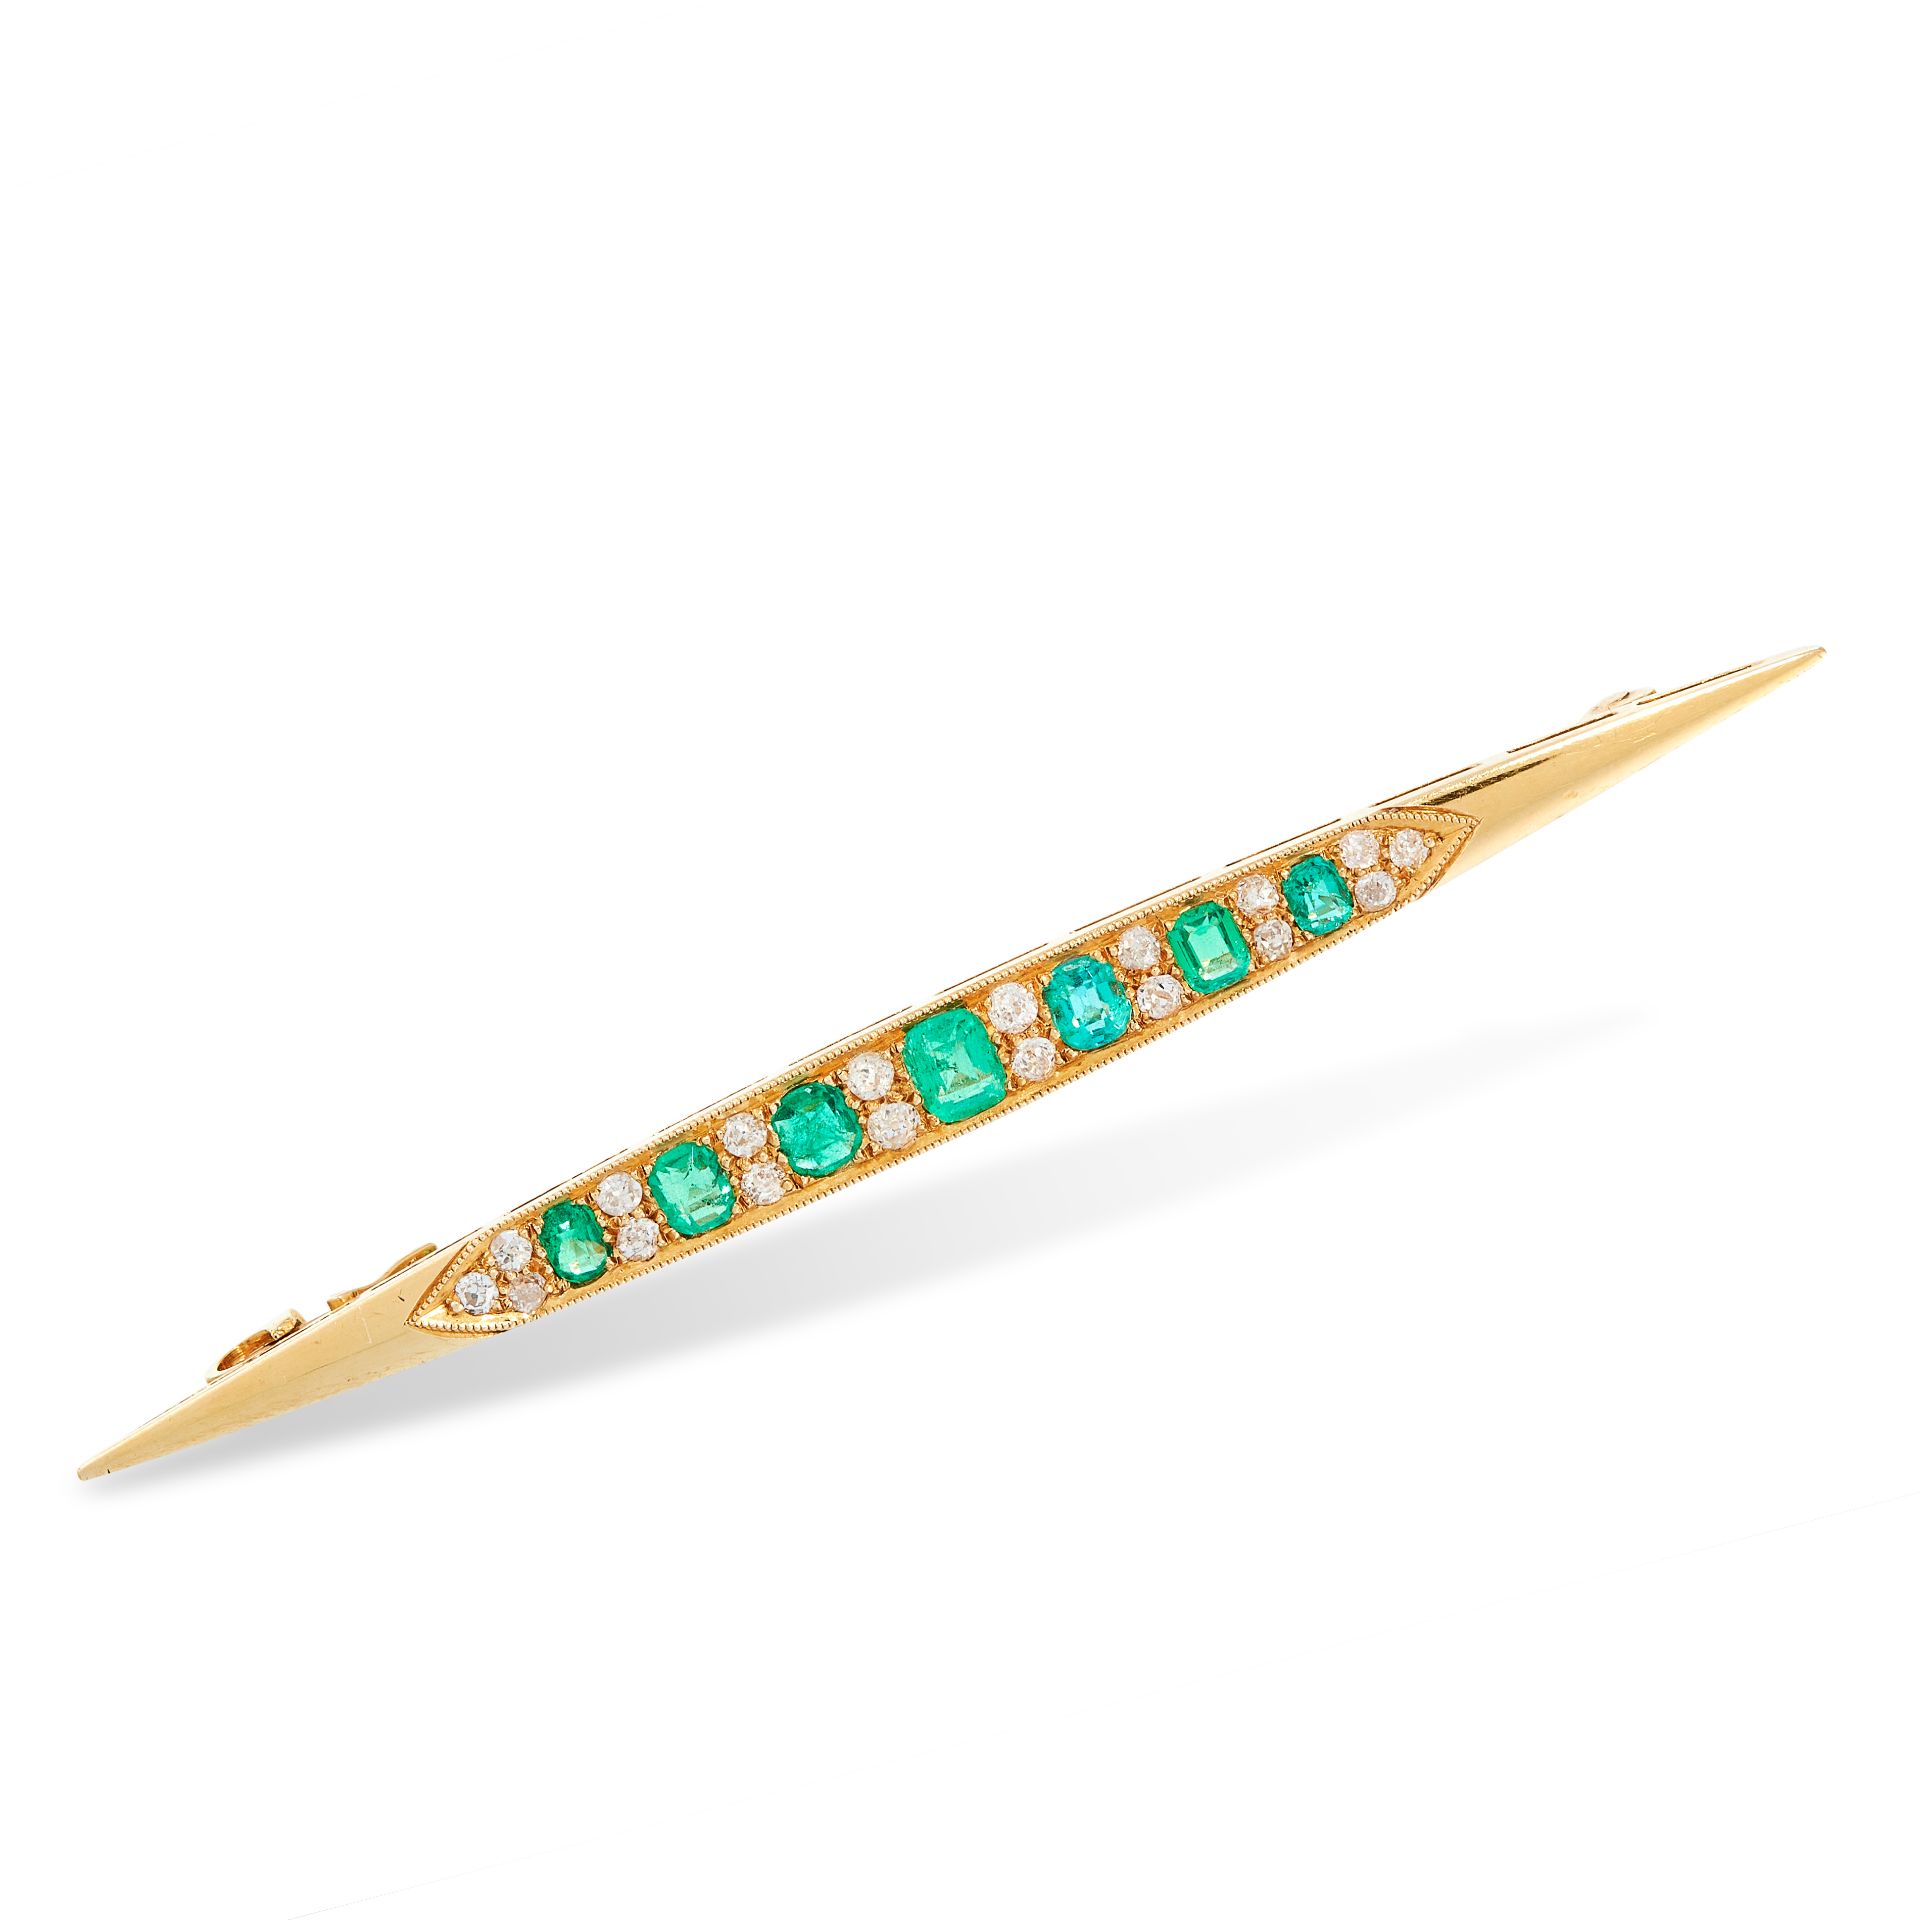 ANTIQUE EMERALD AND DIAMOND BAR BROOCH set with alternating emerald cut emeralds and old cut